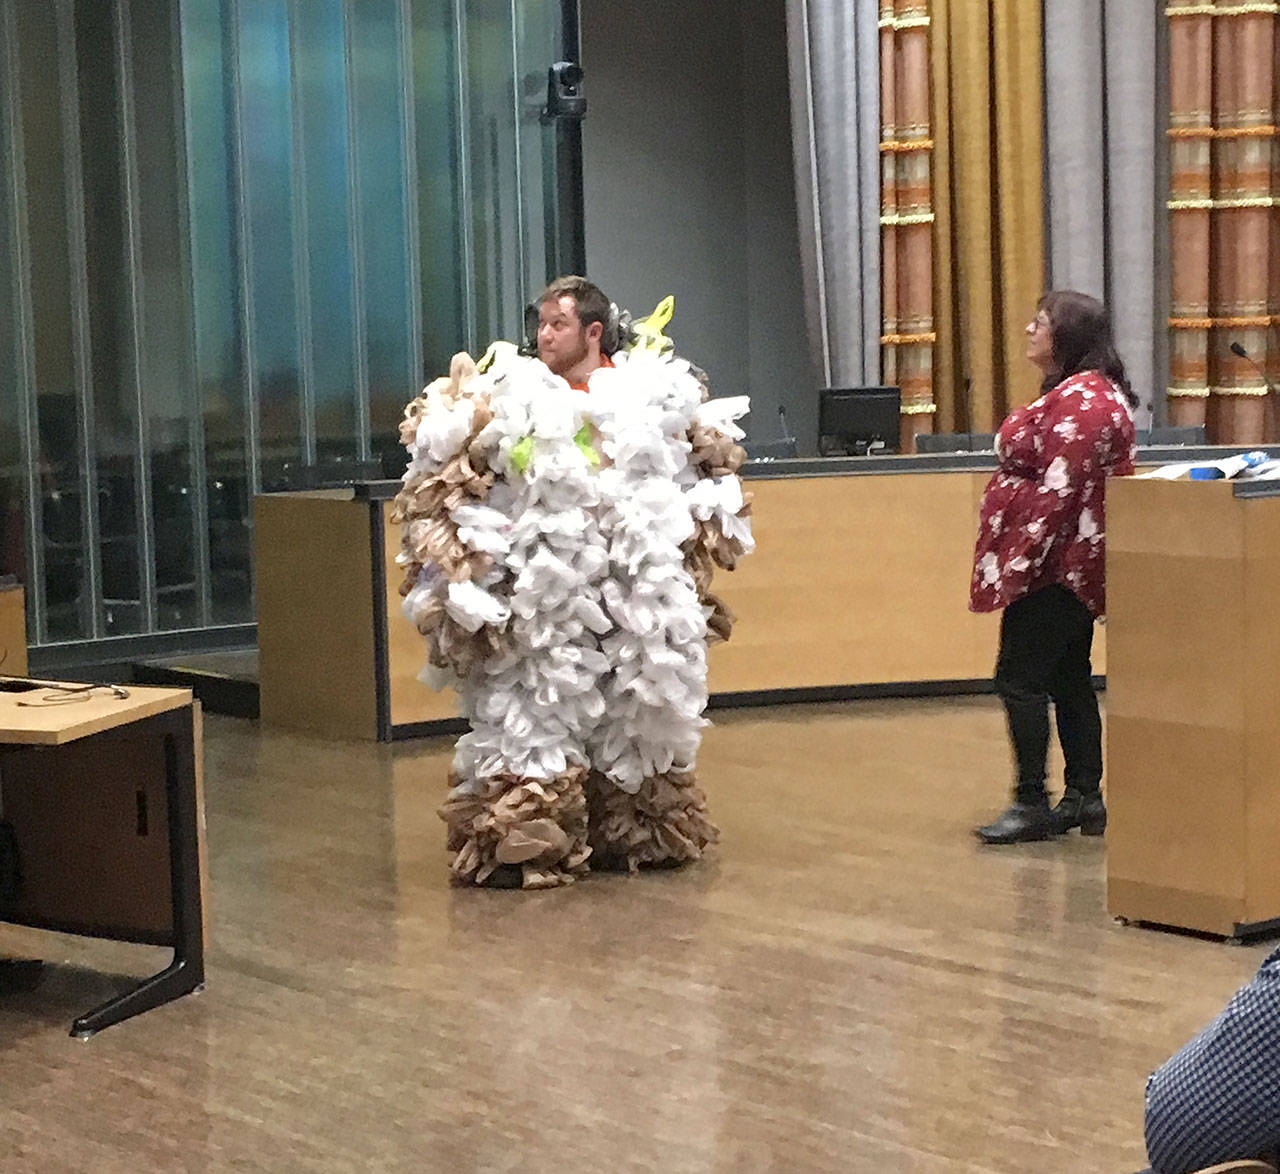 Mixed reaction at first meeting on plastic bag ban